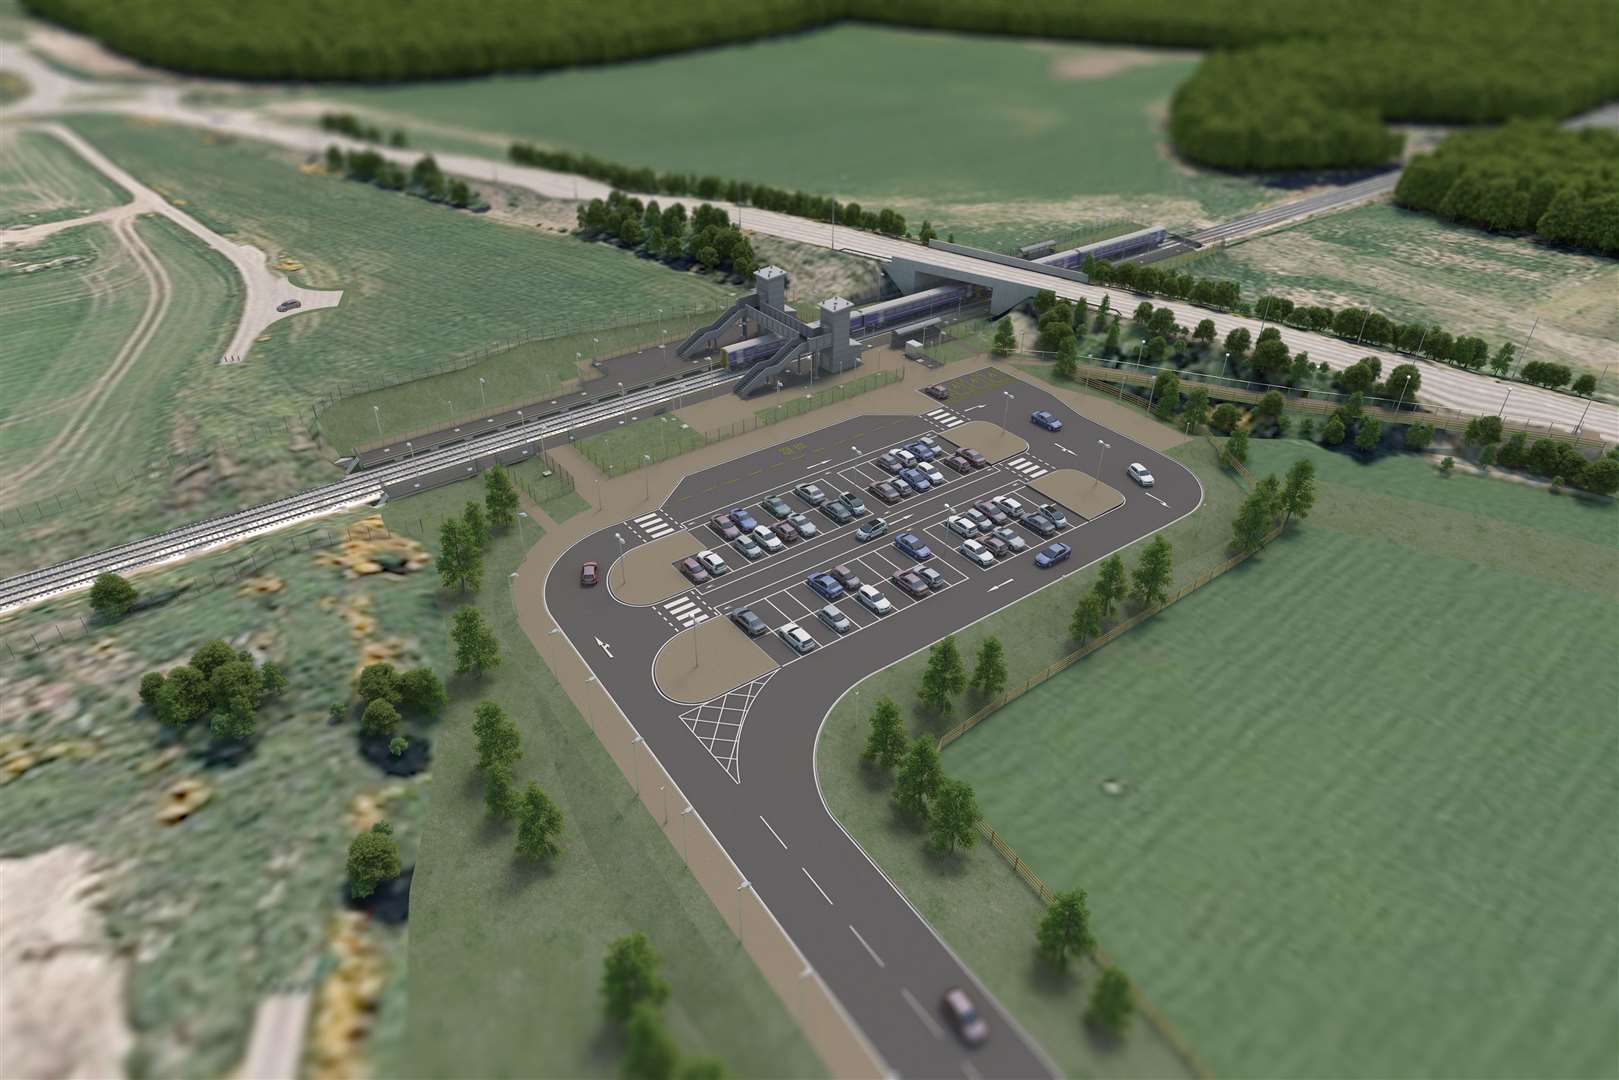 A visual impression of the new airport station.